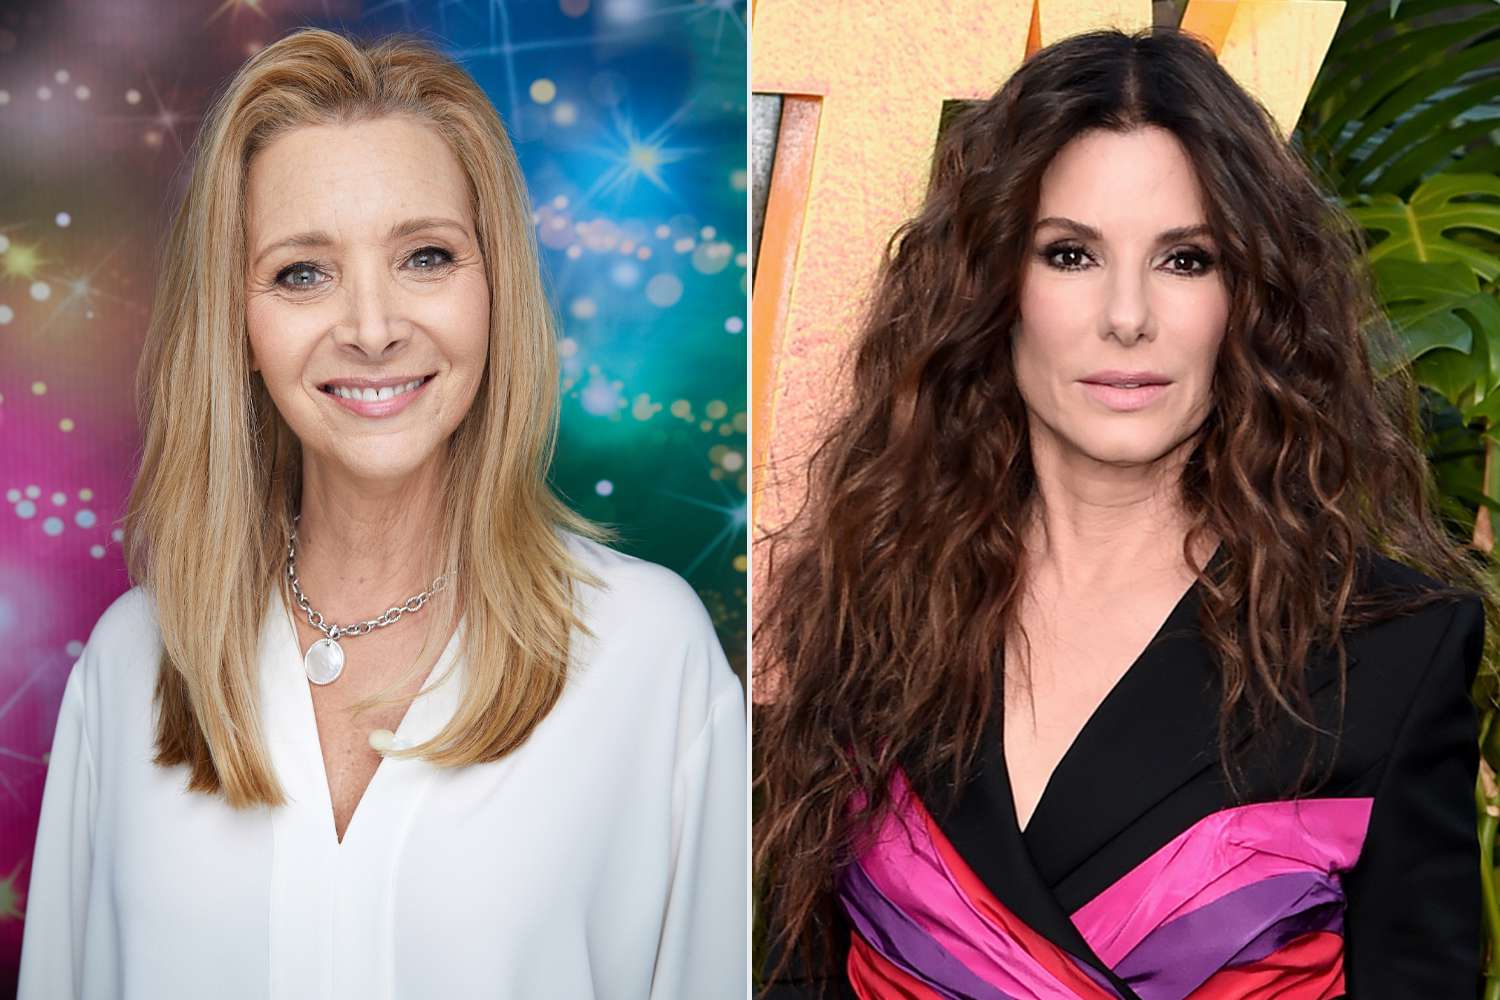 Lisa Kudrow Jokes That Even Sandra Bullock Has Called Her Phoebe by Mistake: ‘What Did I Just Do?'